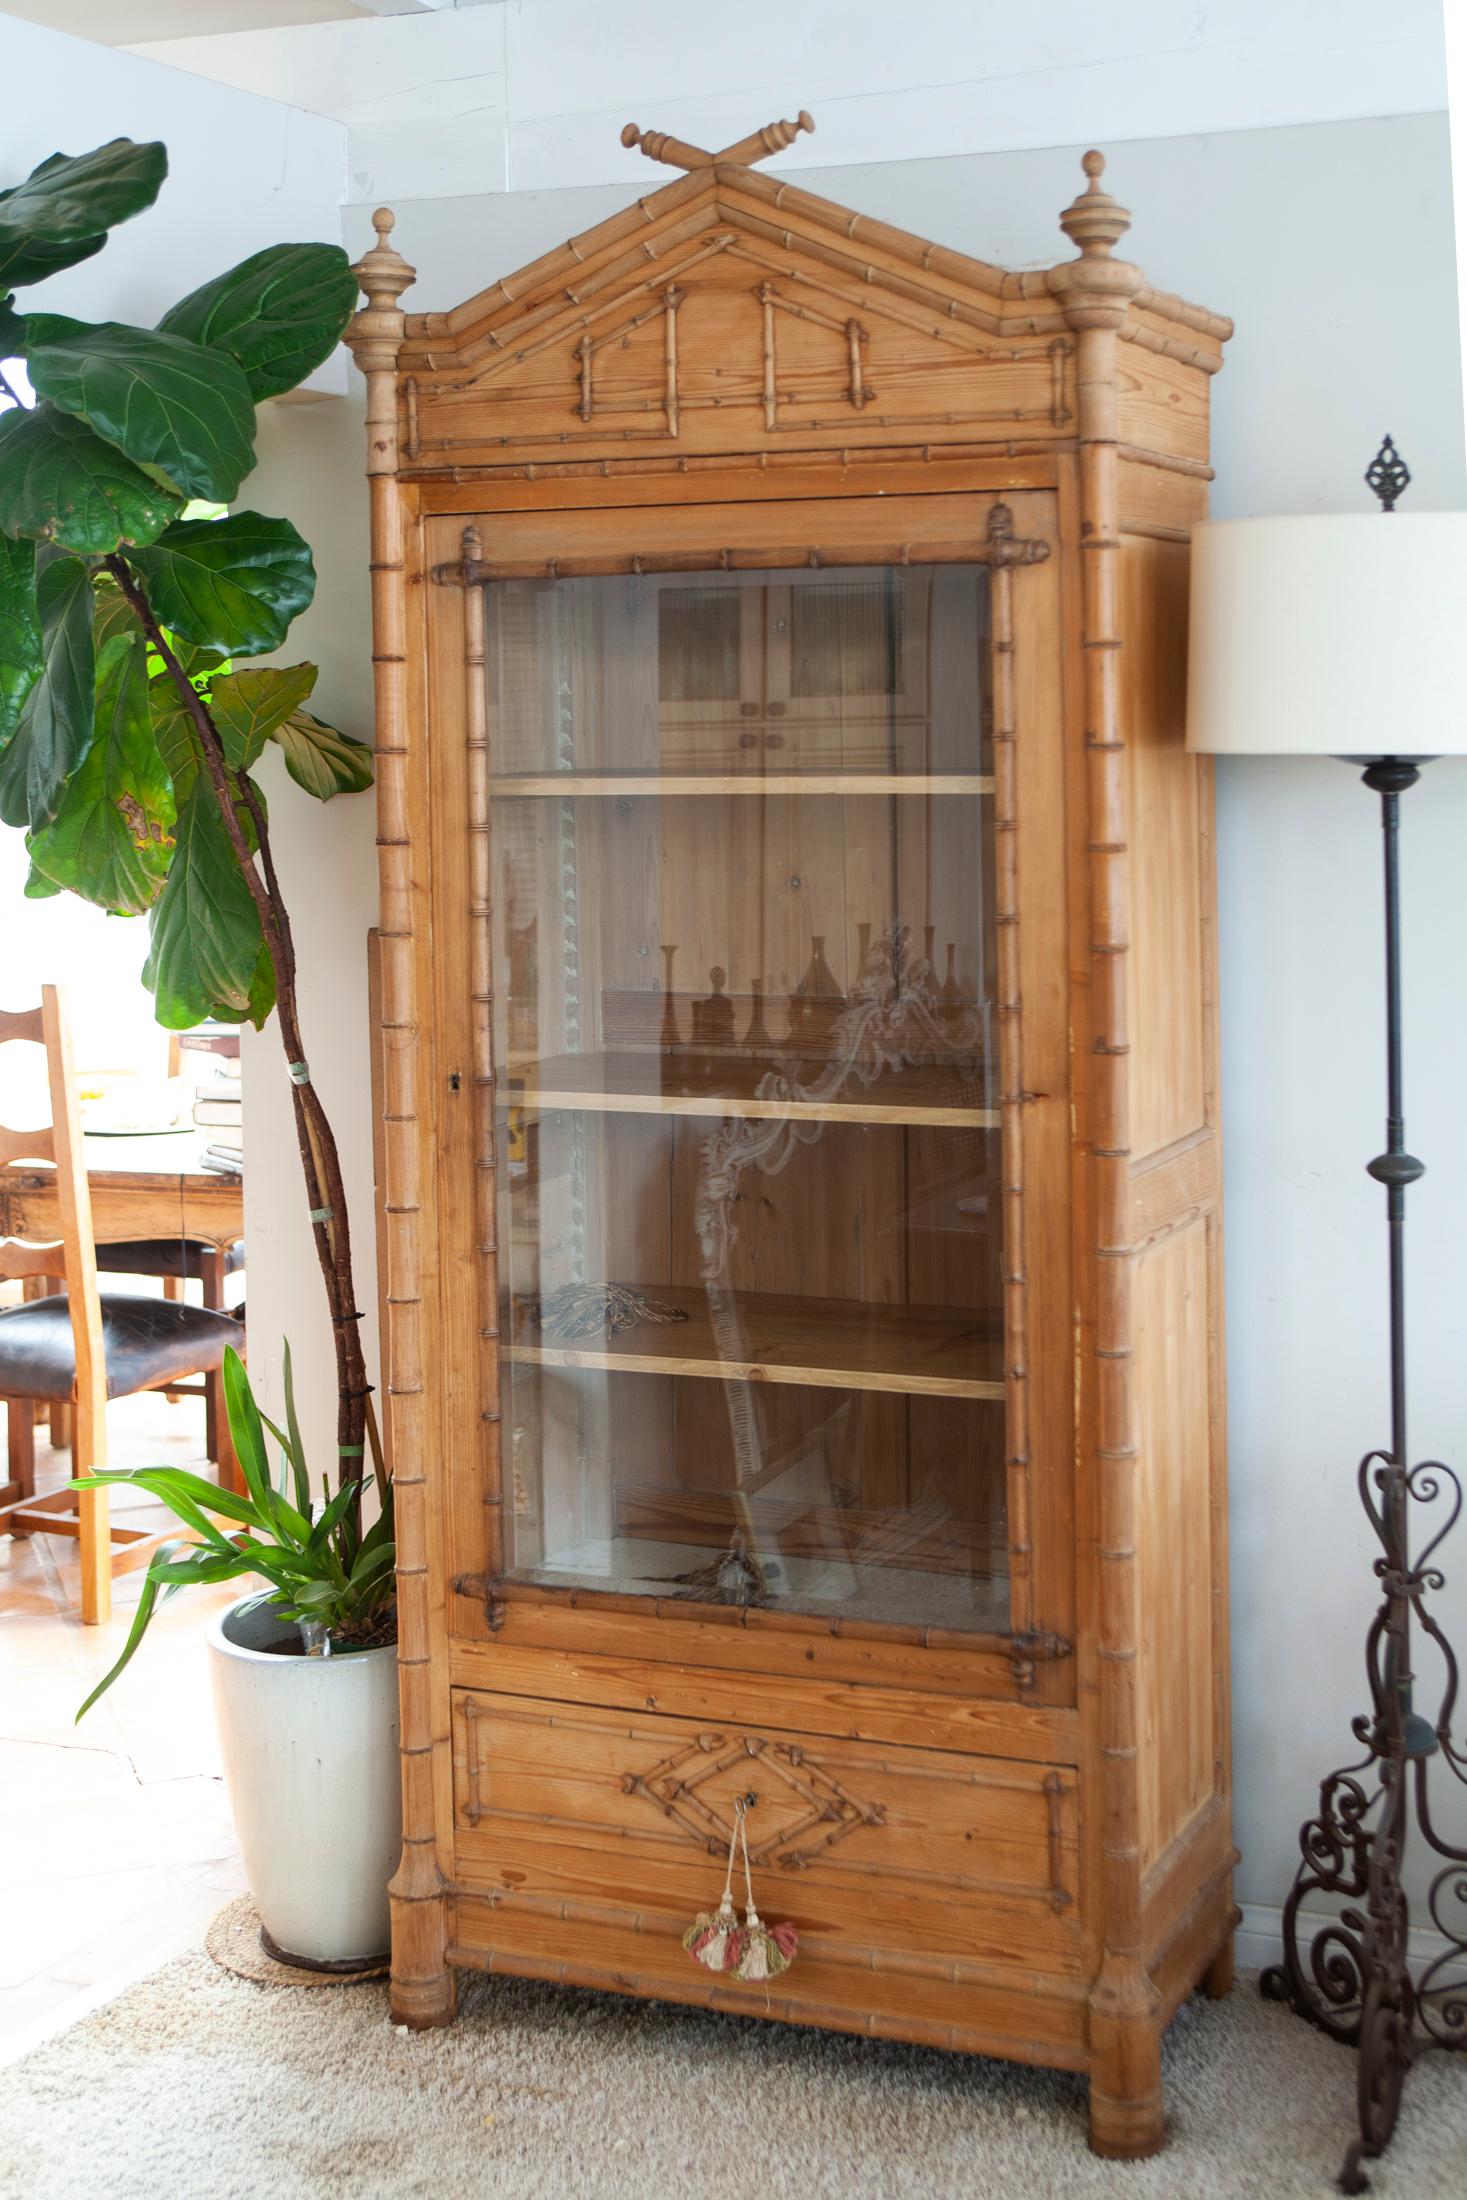 19th century French pine & cherry faux bamboo armoire.
A pine pitched piece with hand turned cherry wood appliqued trim & moldings 
 with simple paneled sides.
The case has a single drawer beloved the beveled glass door panel flanked by hand